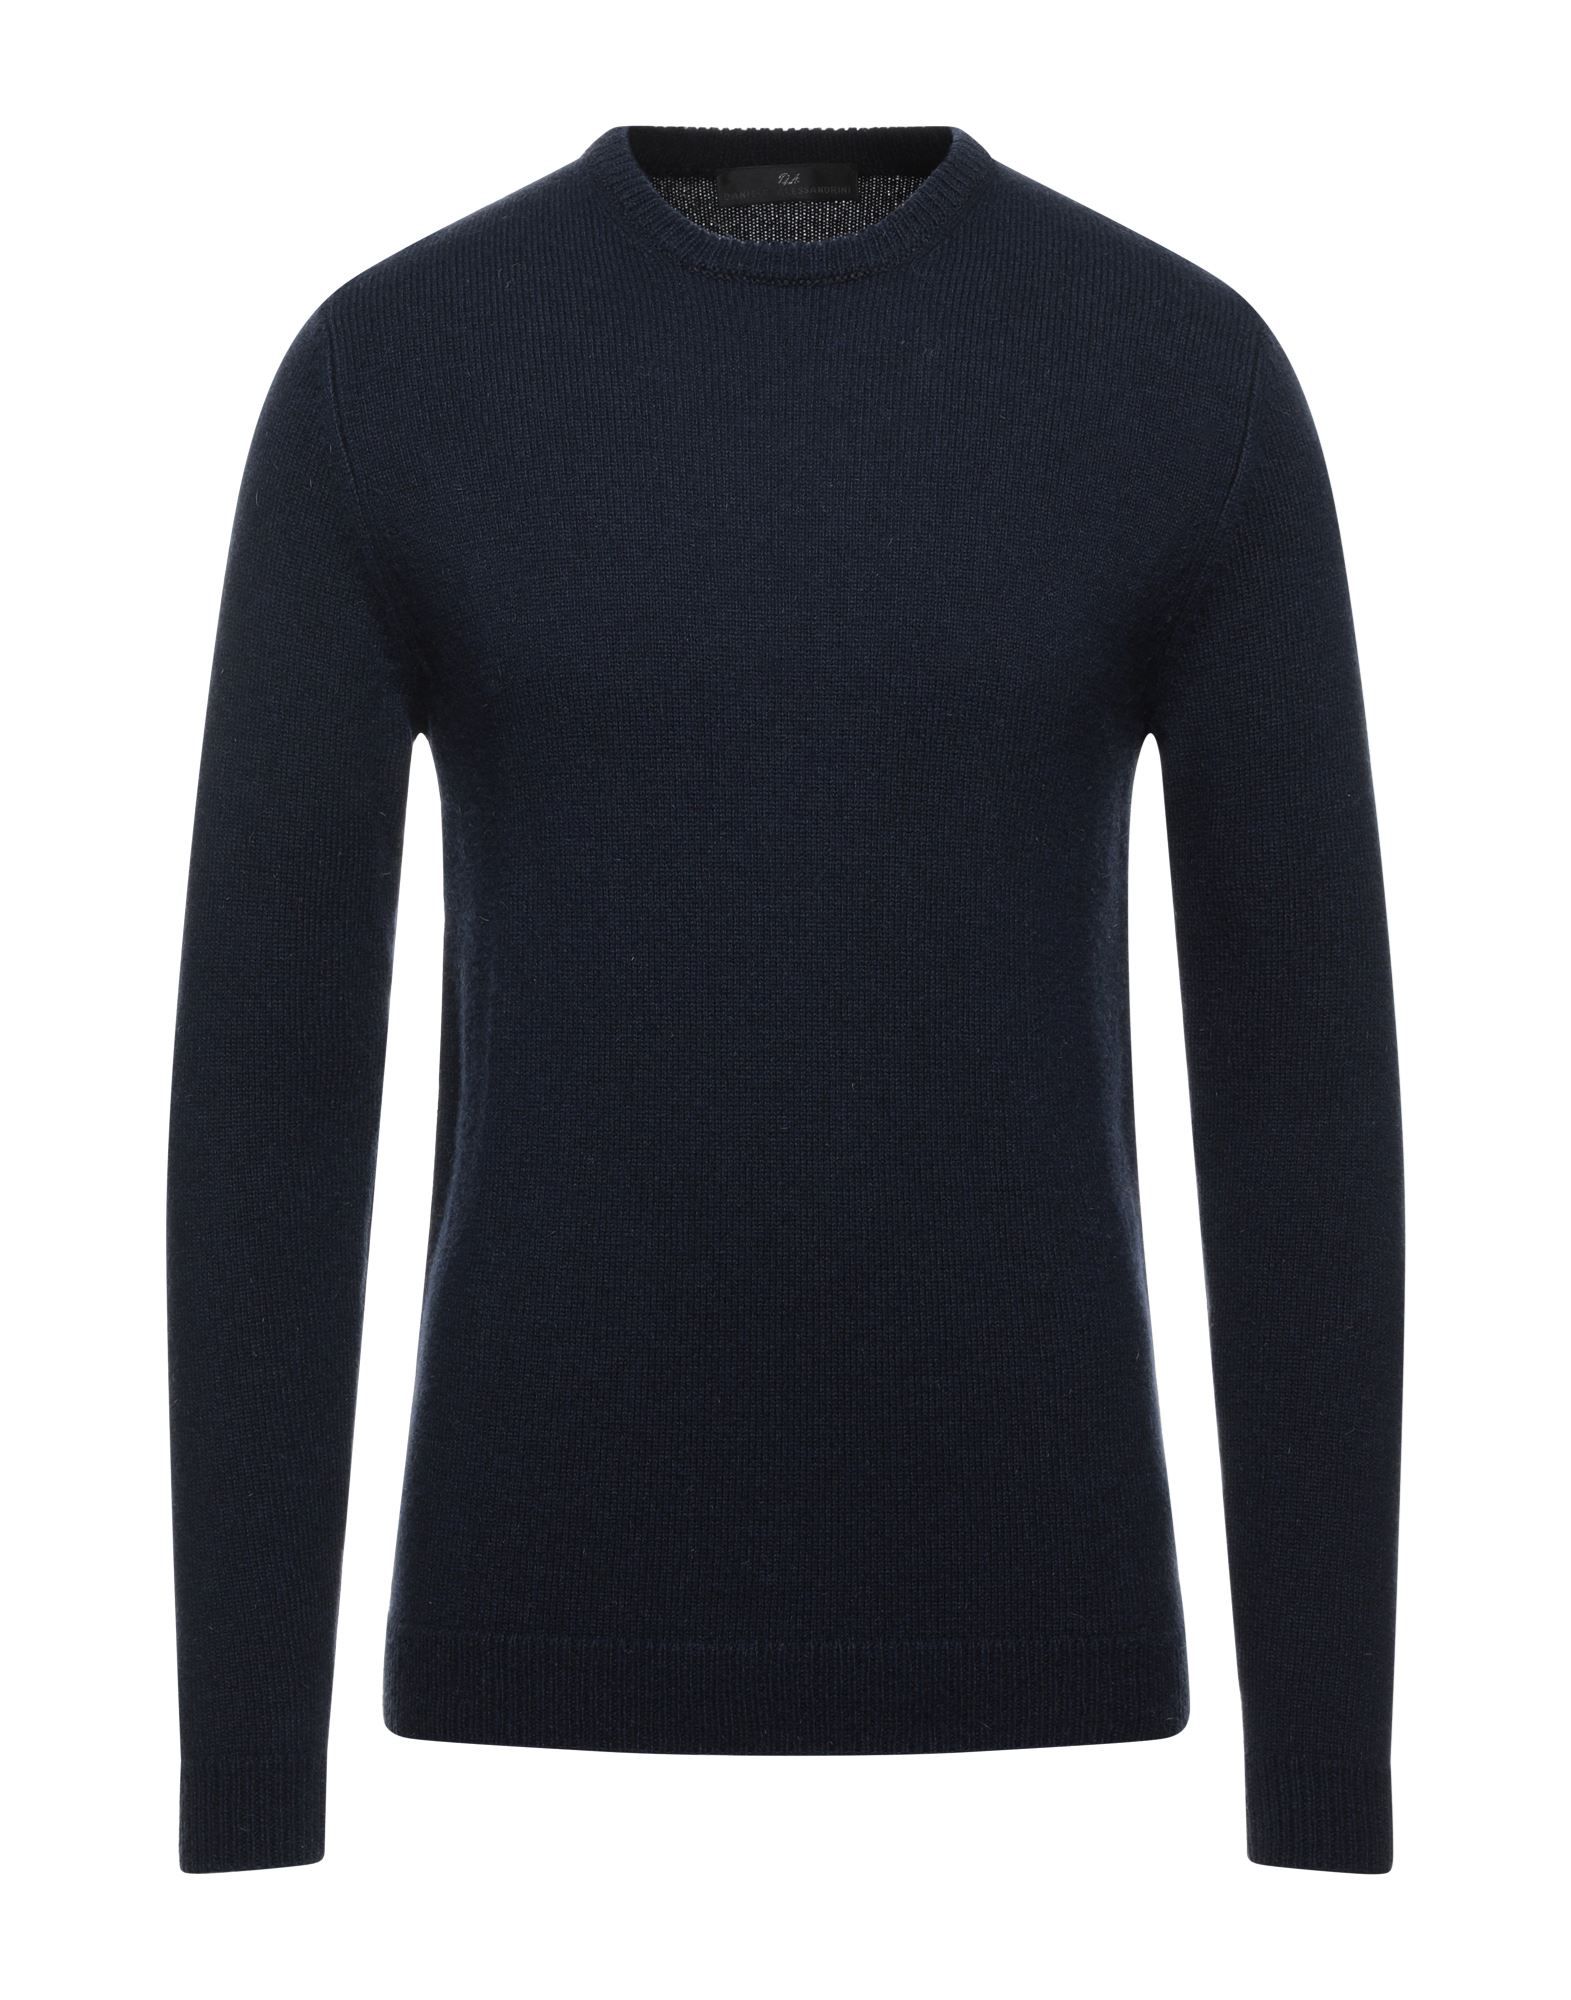 knitted, no appliqués, medium-weight knit, round collar, two-tone, long sleeves, no pockets